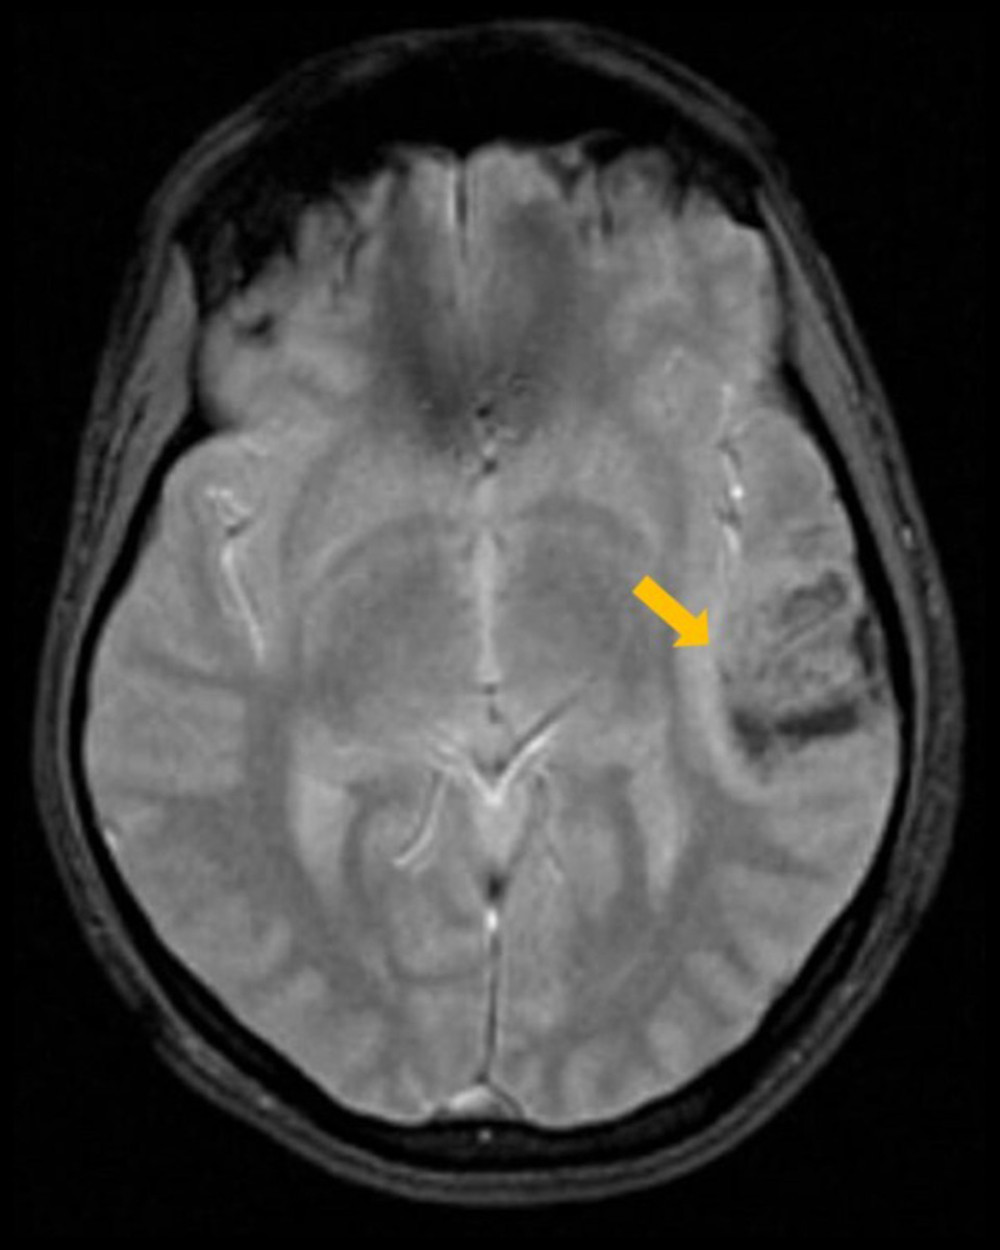 Gradient echo brain sequence repeated on day 6 of admission revealed the development of petechial hemorrhages within the core of the venous ischemic region of the left temporal lobe.